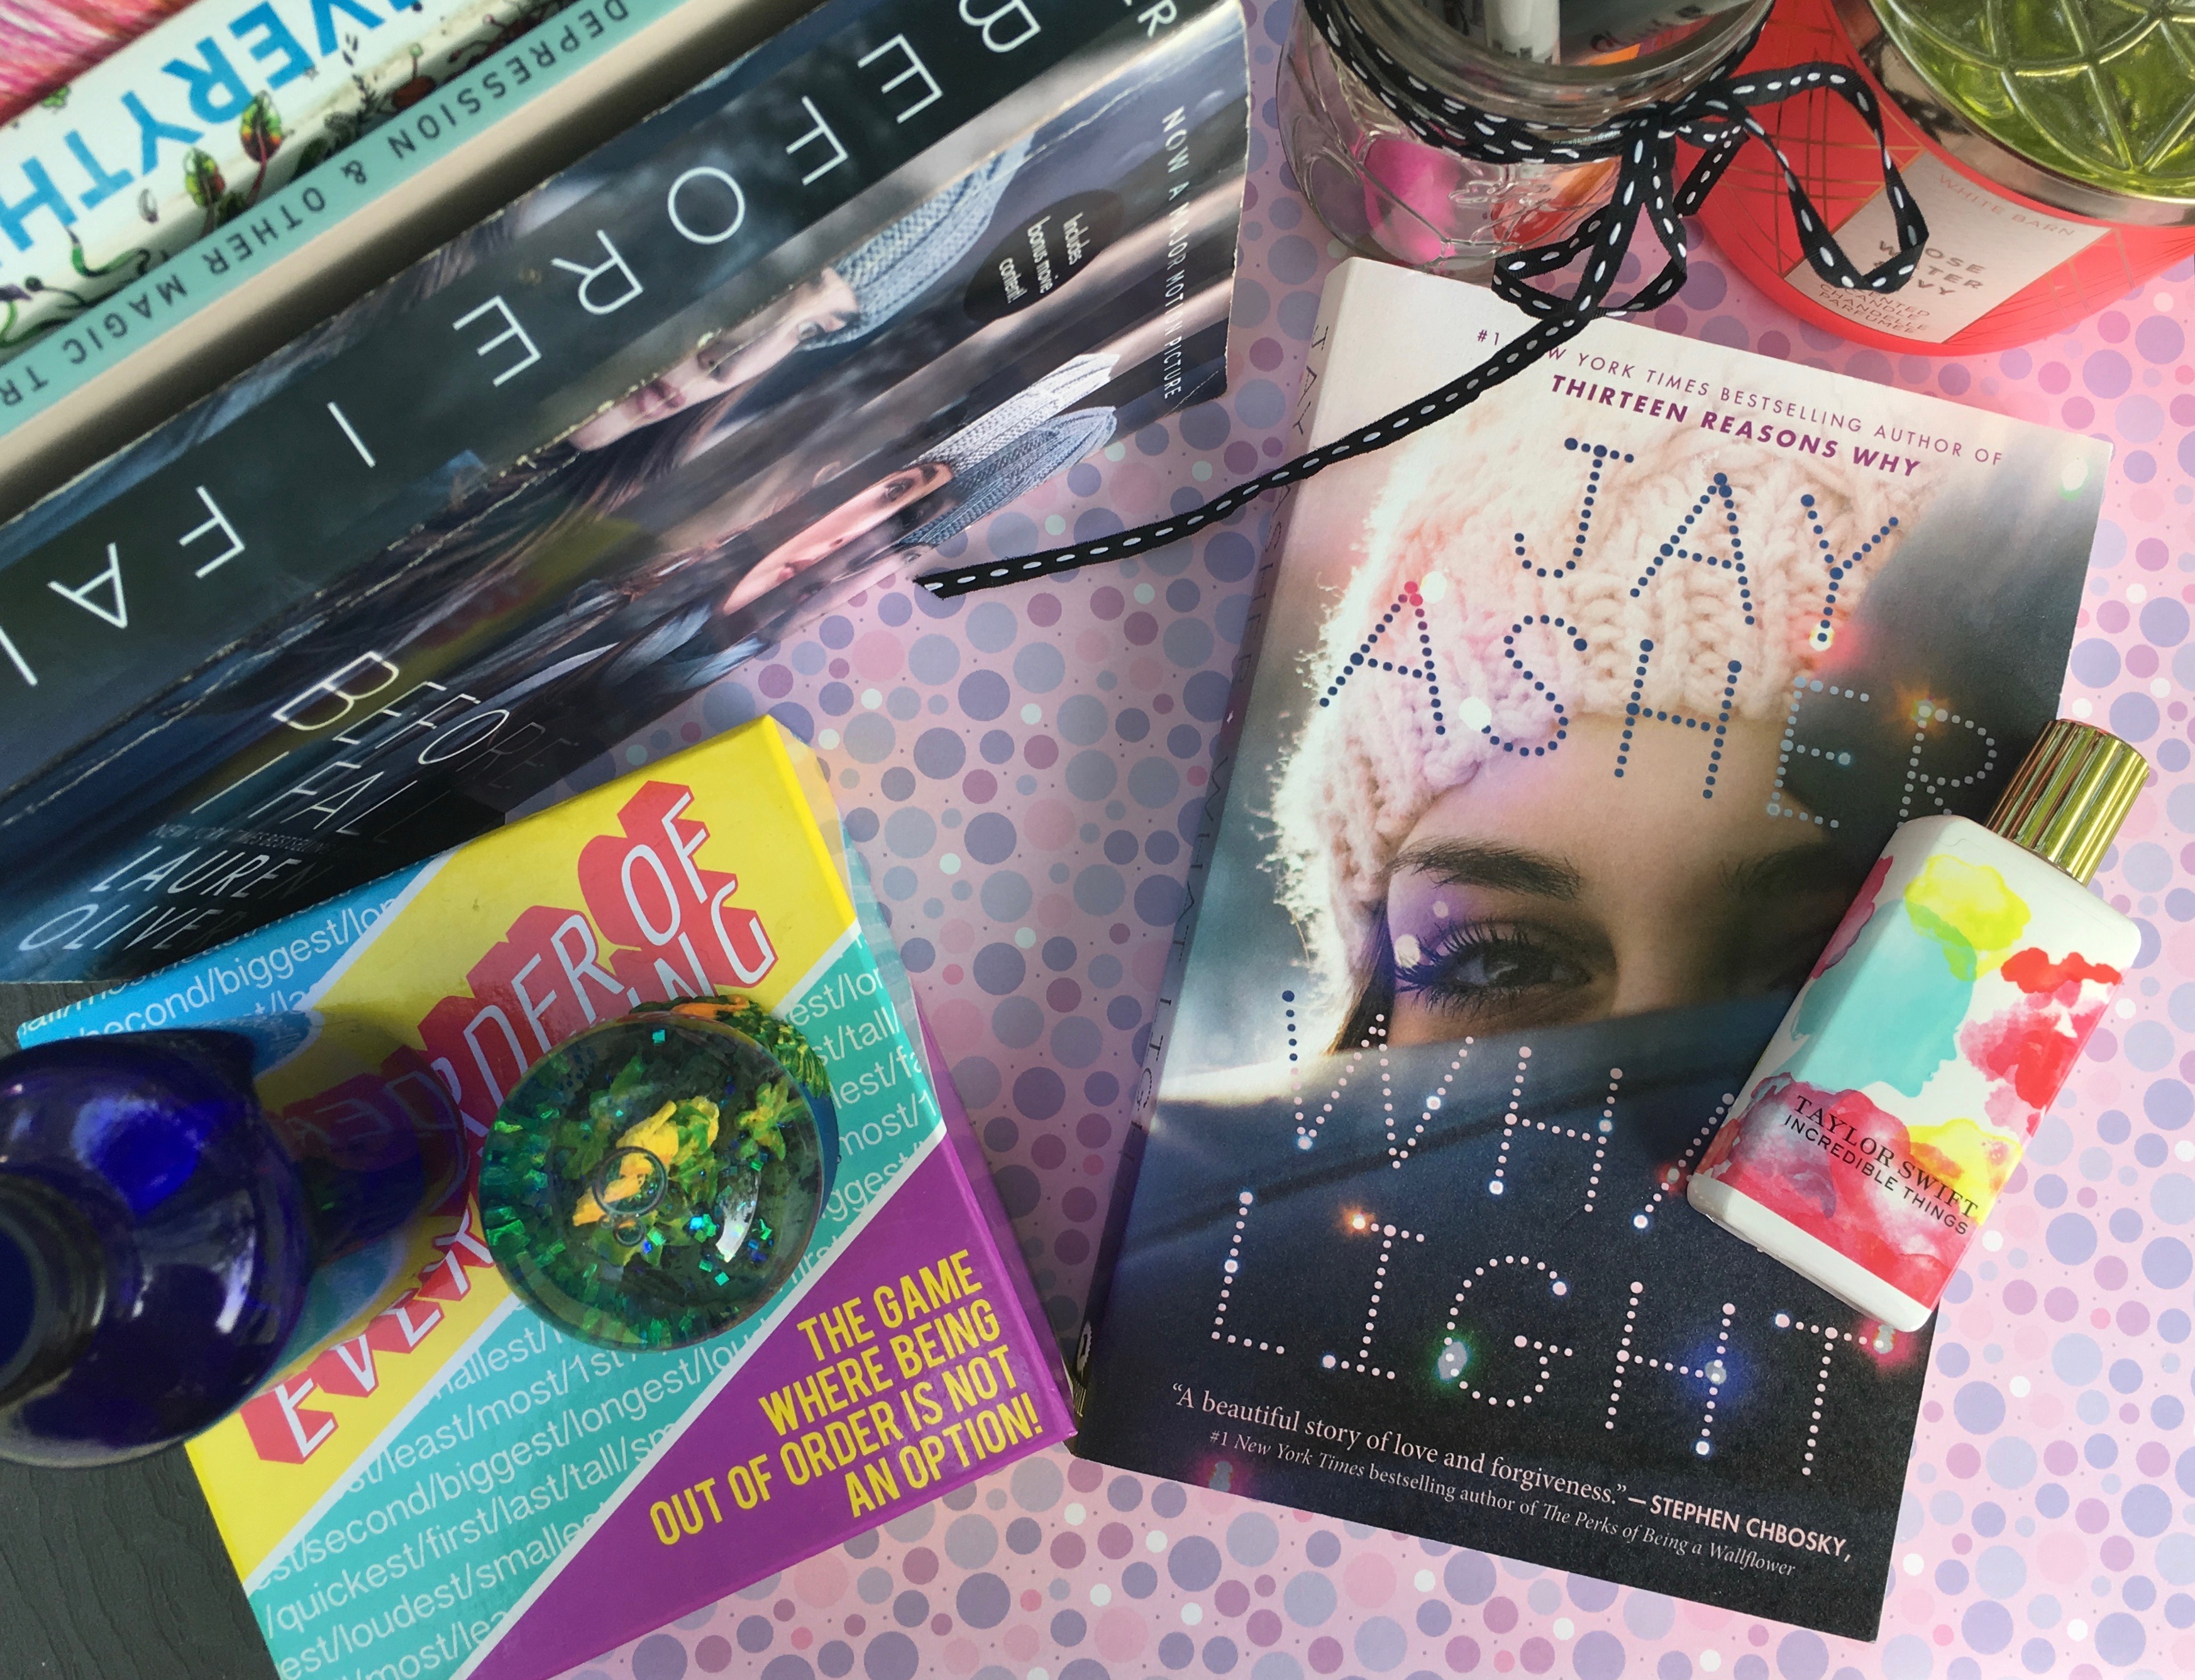 What Light by Jay Asher – Review